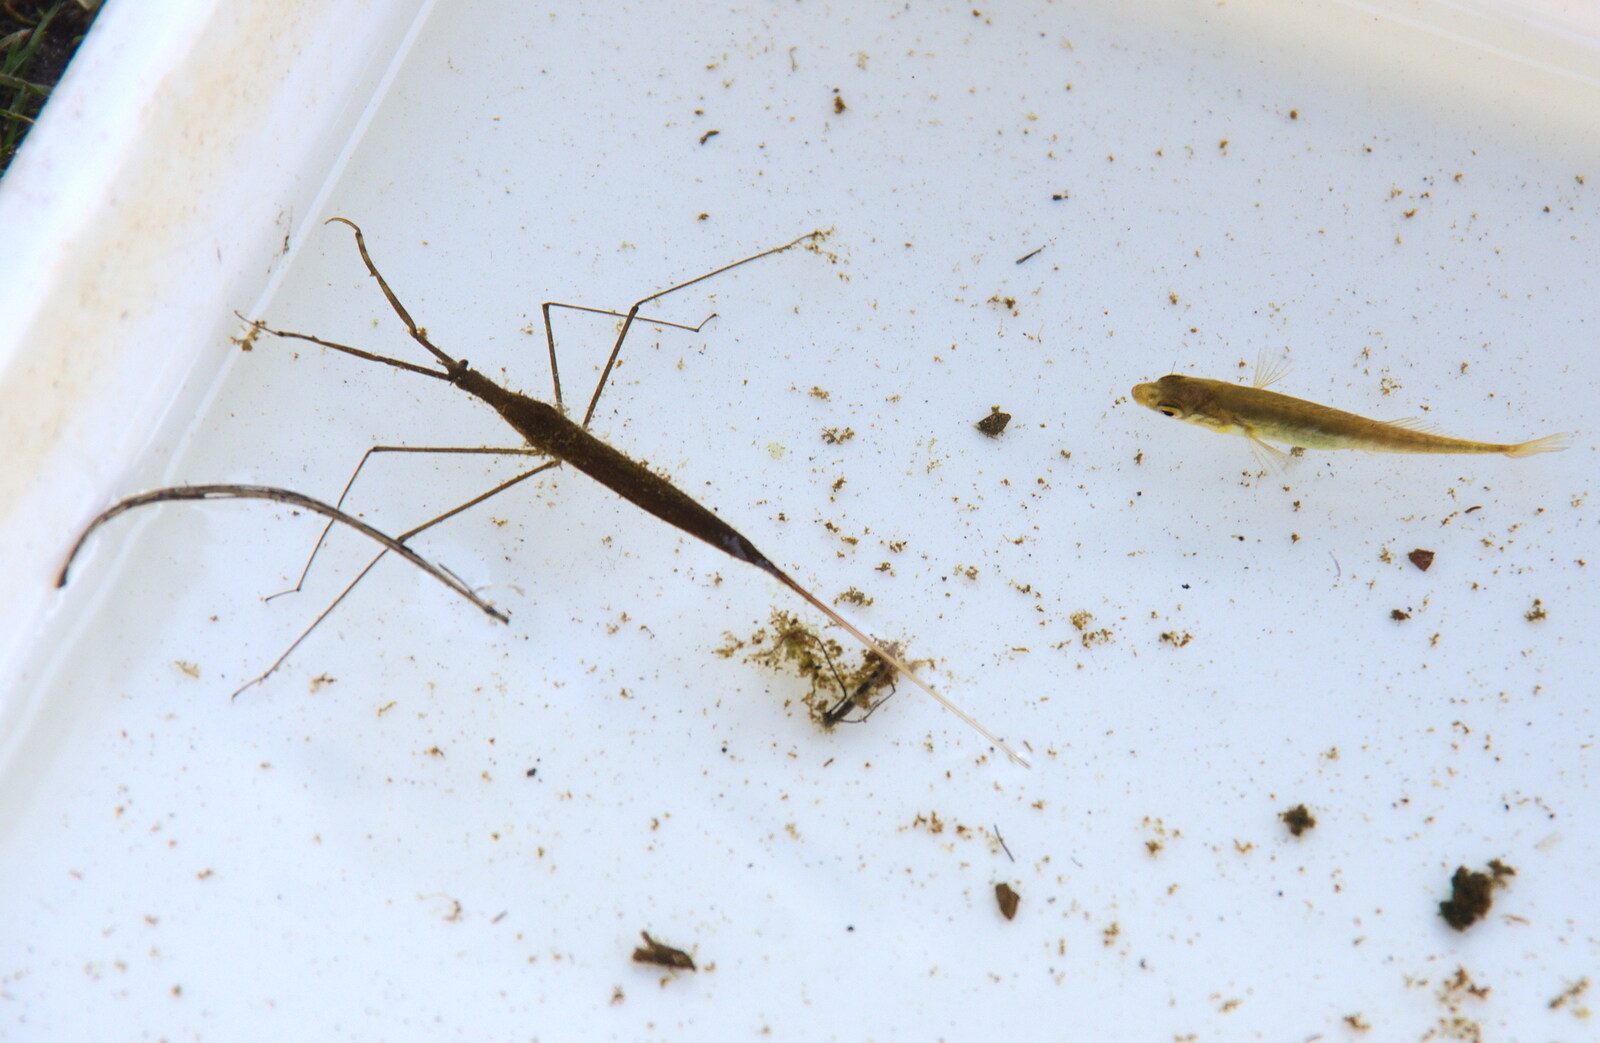 Aquatic stick insect and stickleback from A Trip to Dunwich Heath, Dunwich, Suffolk - 17th February 2019